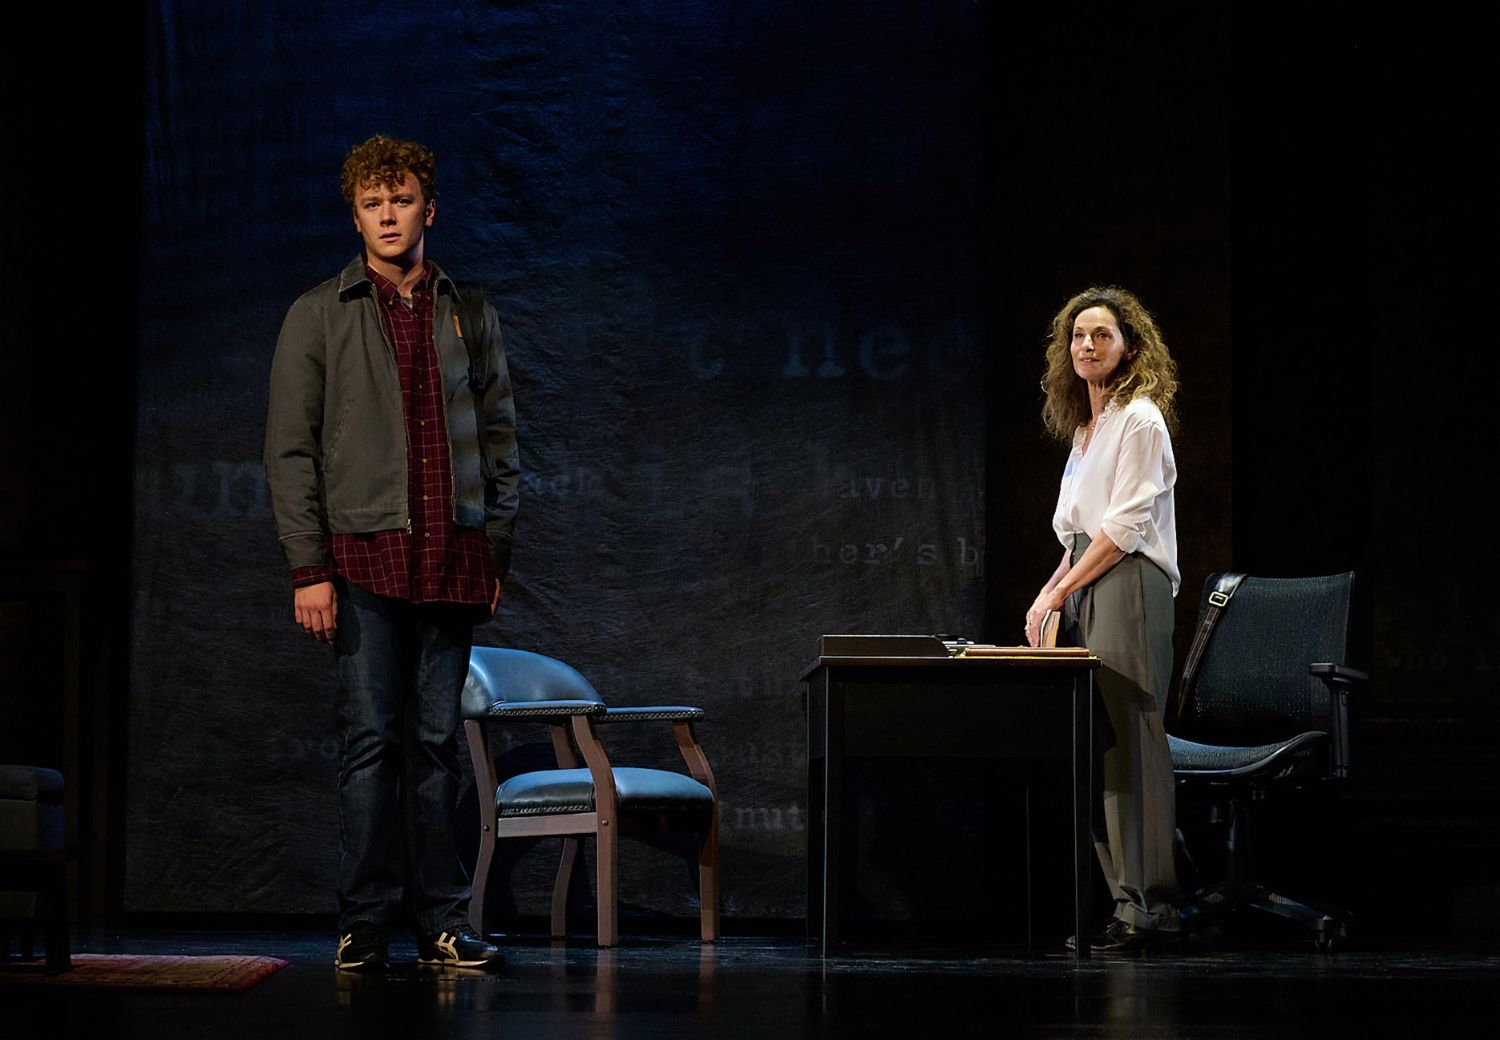 PHOTO: Mike Palma | The South Pasadenan | Anders Keith and Amy Brenneman in The Sound Inside on stage at Pasadena Playhouse.